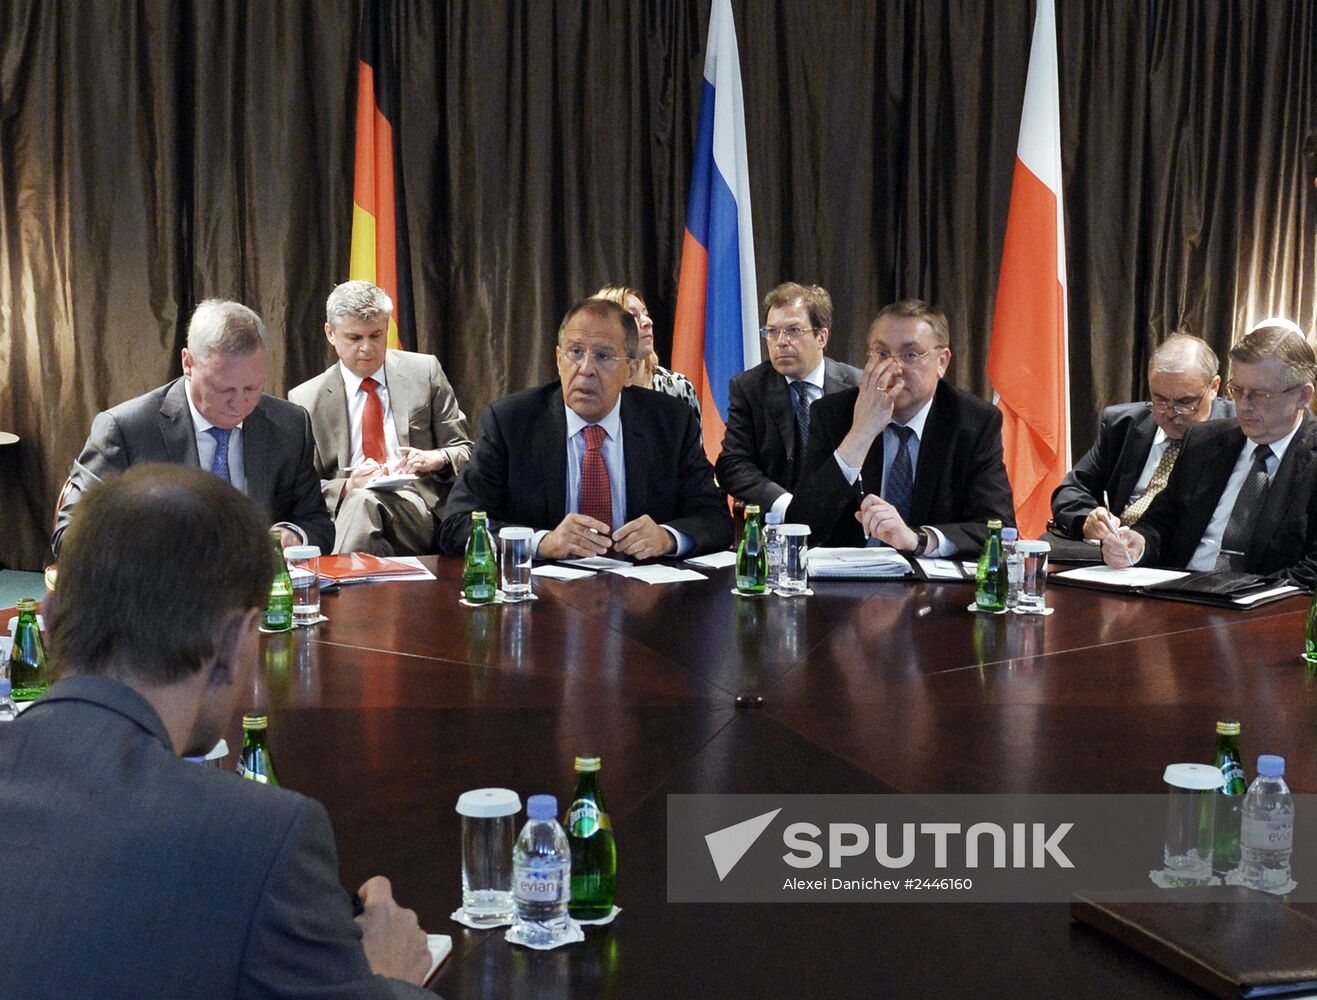 Fourth meeting of foreign minister of Germany, Poland and Russia